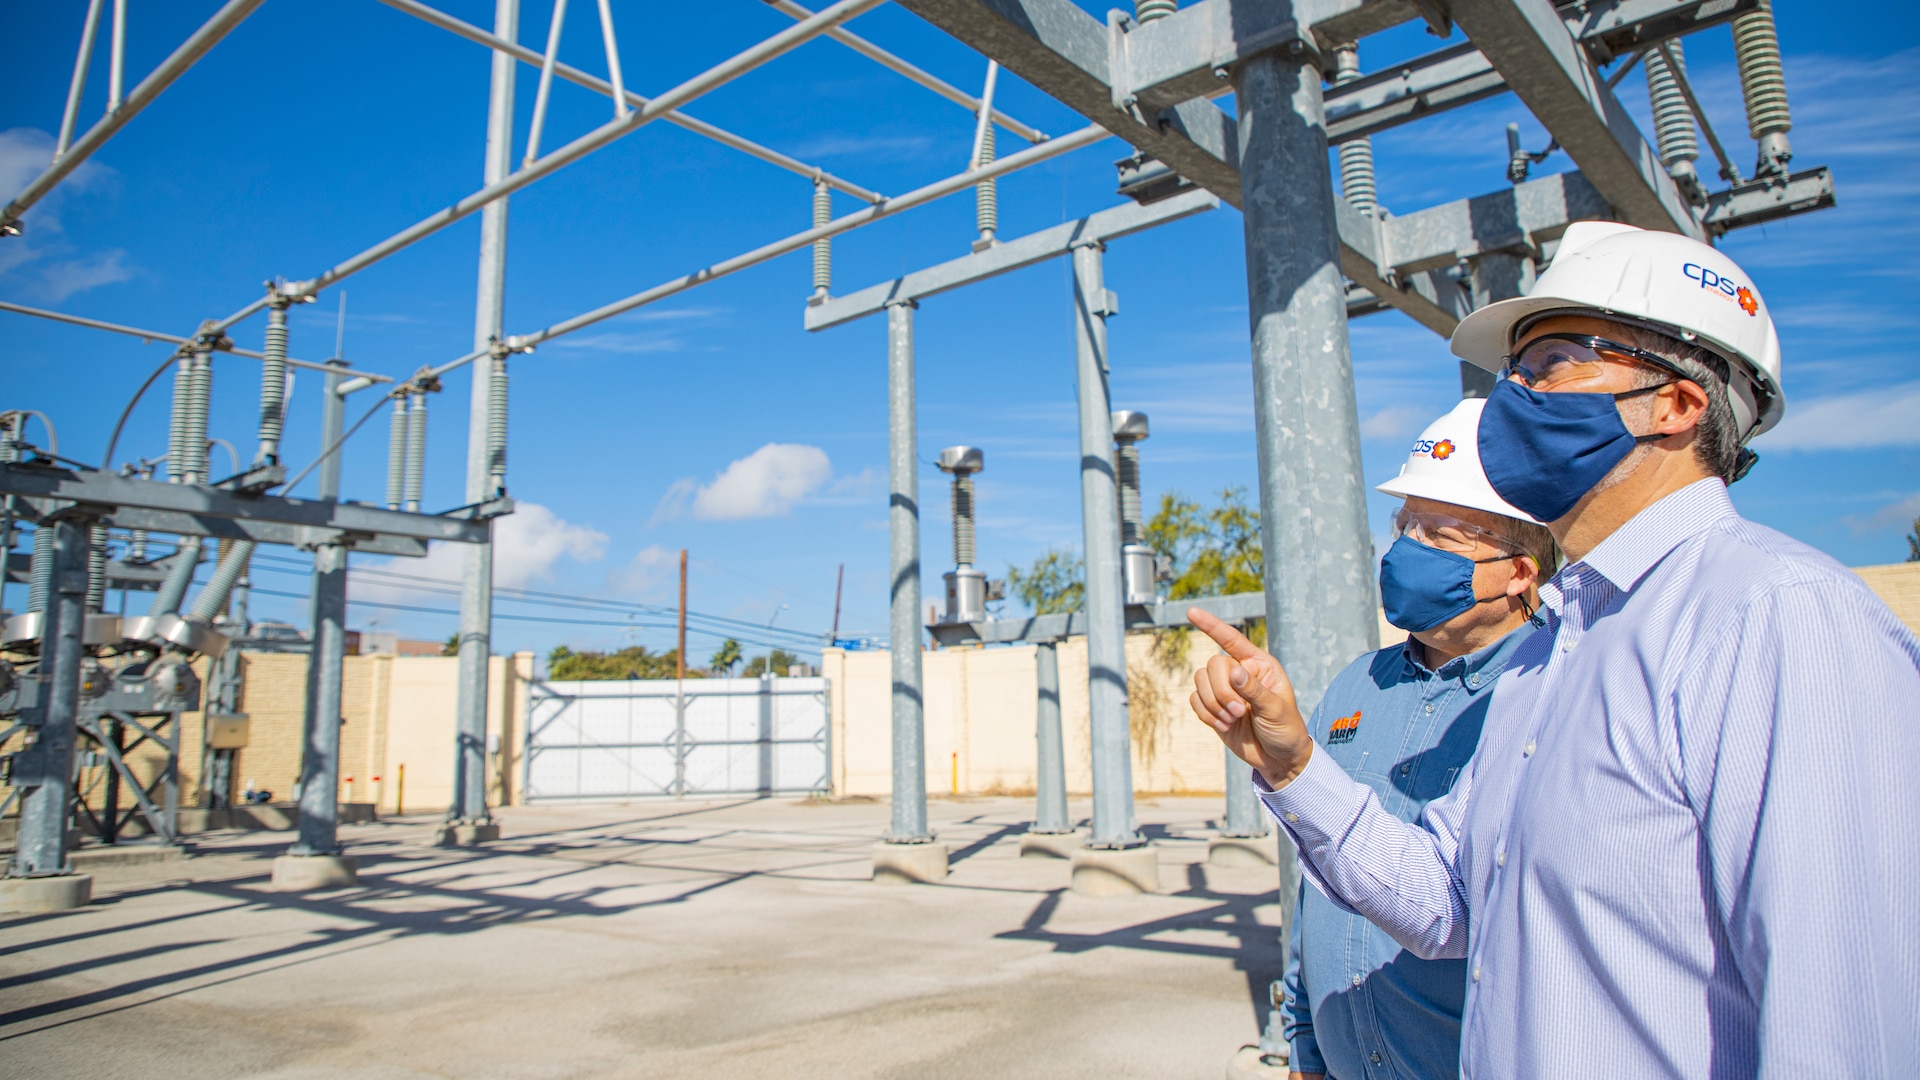 CPS Energy’s Vice President of Grid Transformation & Engineering, Richard Medina, front, and Chief Security, Safety & Gas Solutions Officer Fred Bonewell evaluate security measures at an area substation.